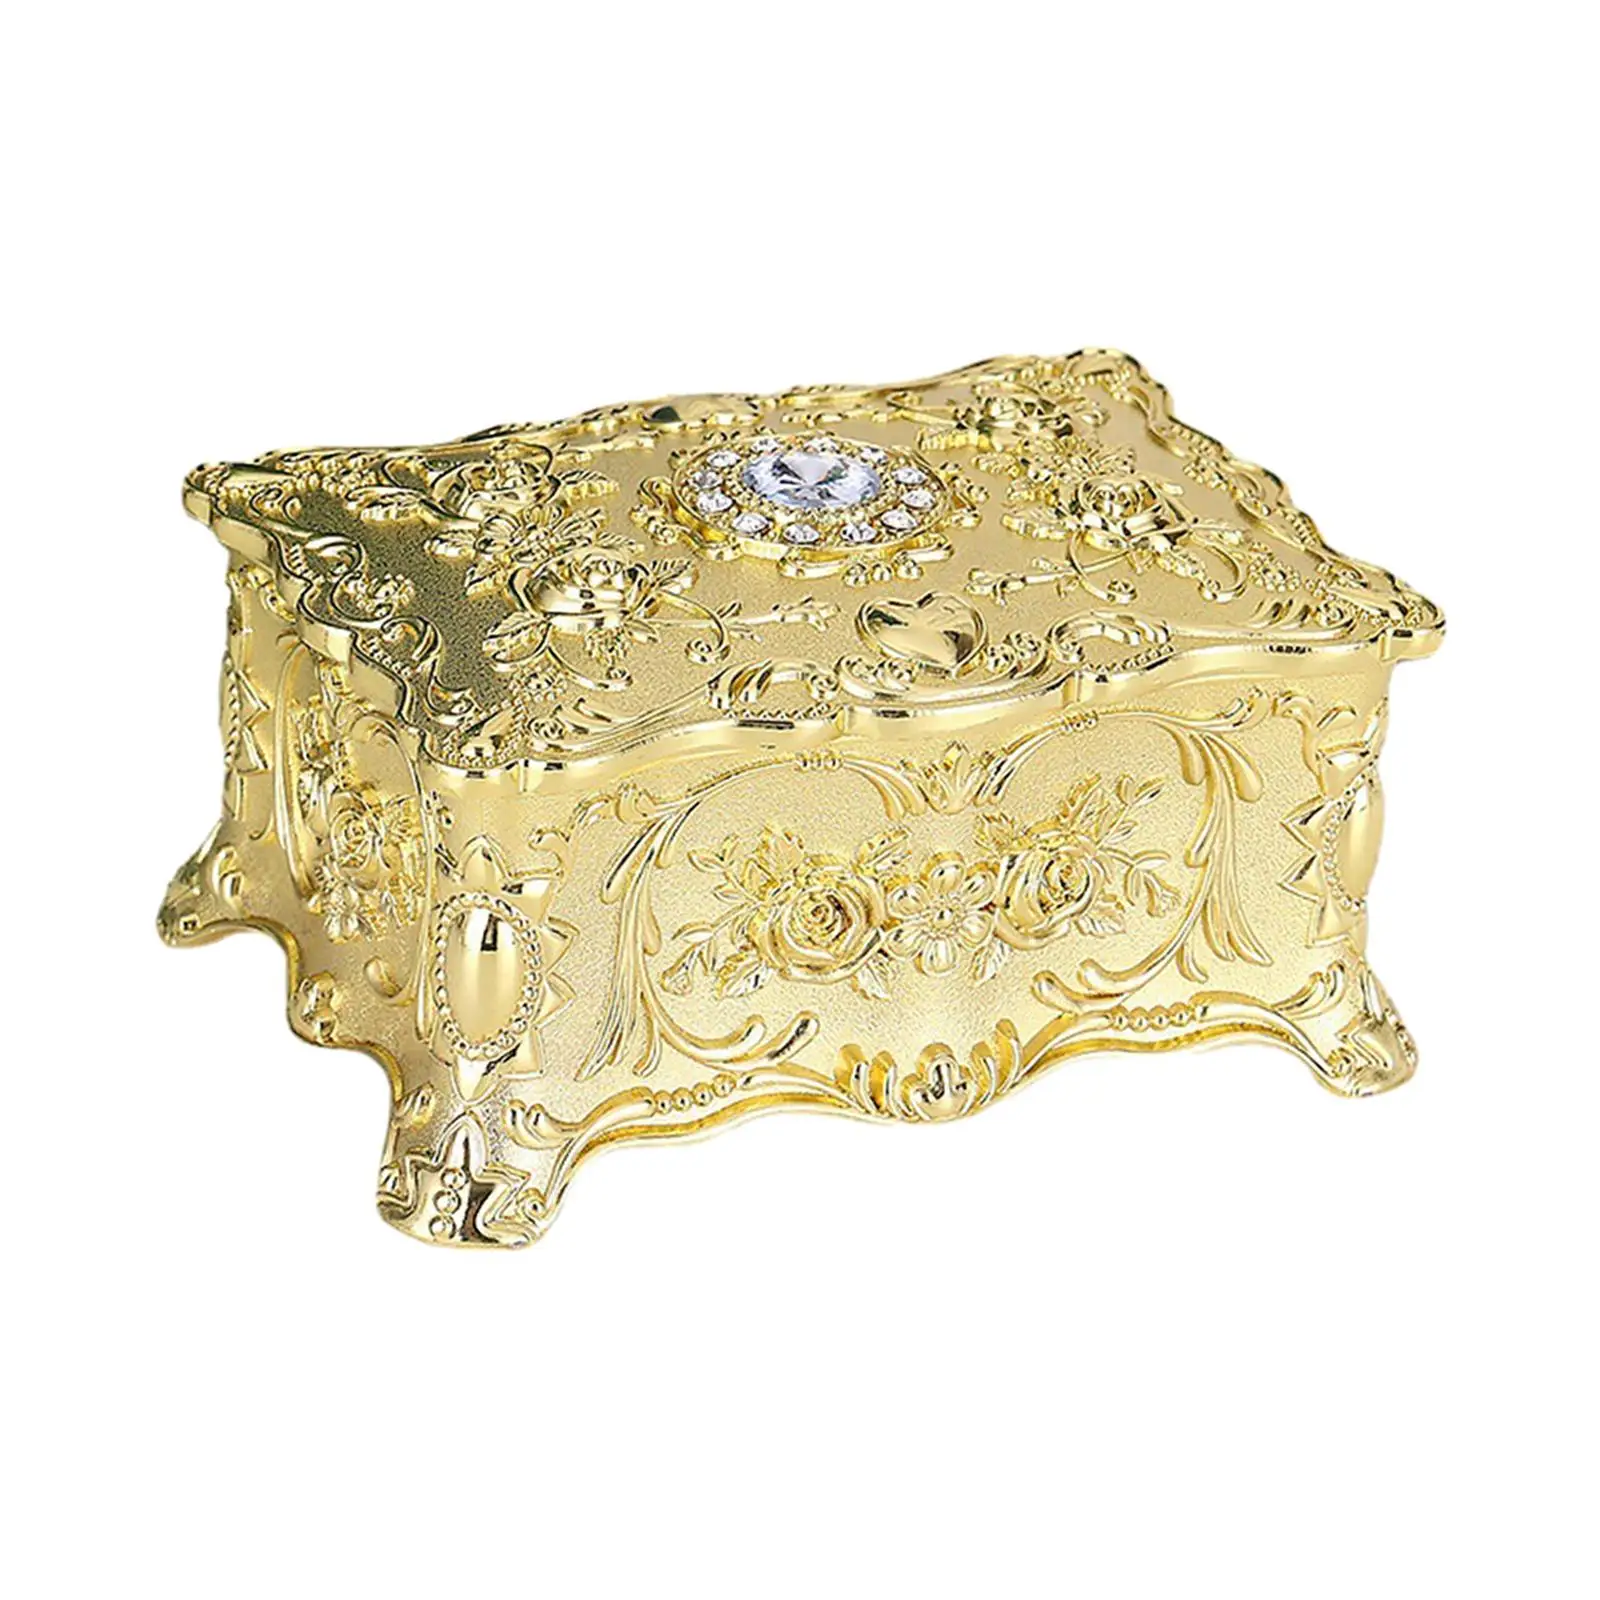 Jewelry Box Treasure Keepsake Box Display Case Rings Holder Container for Living Room Party Anniversary Desktop Decor